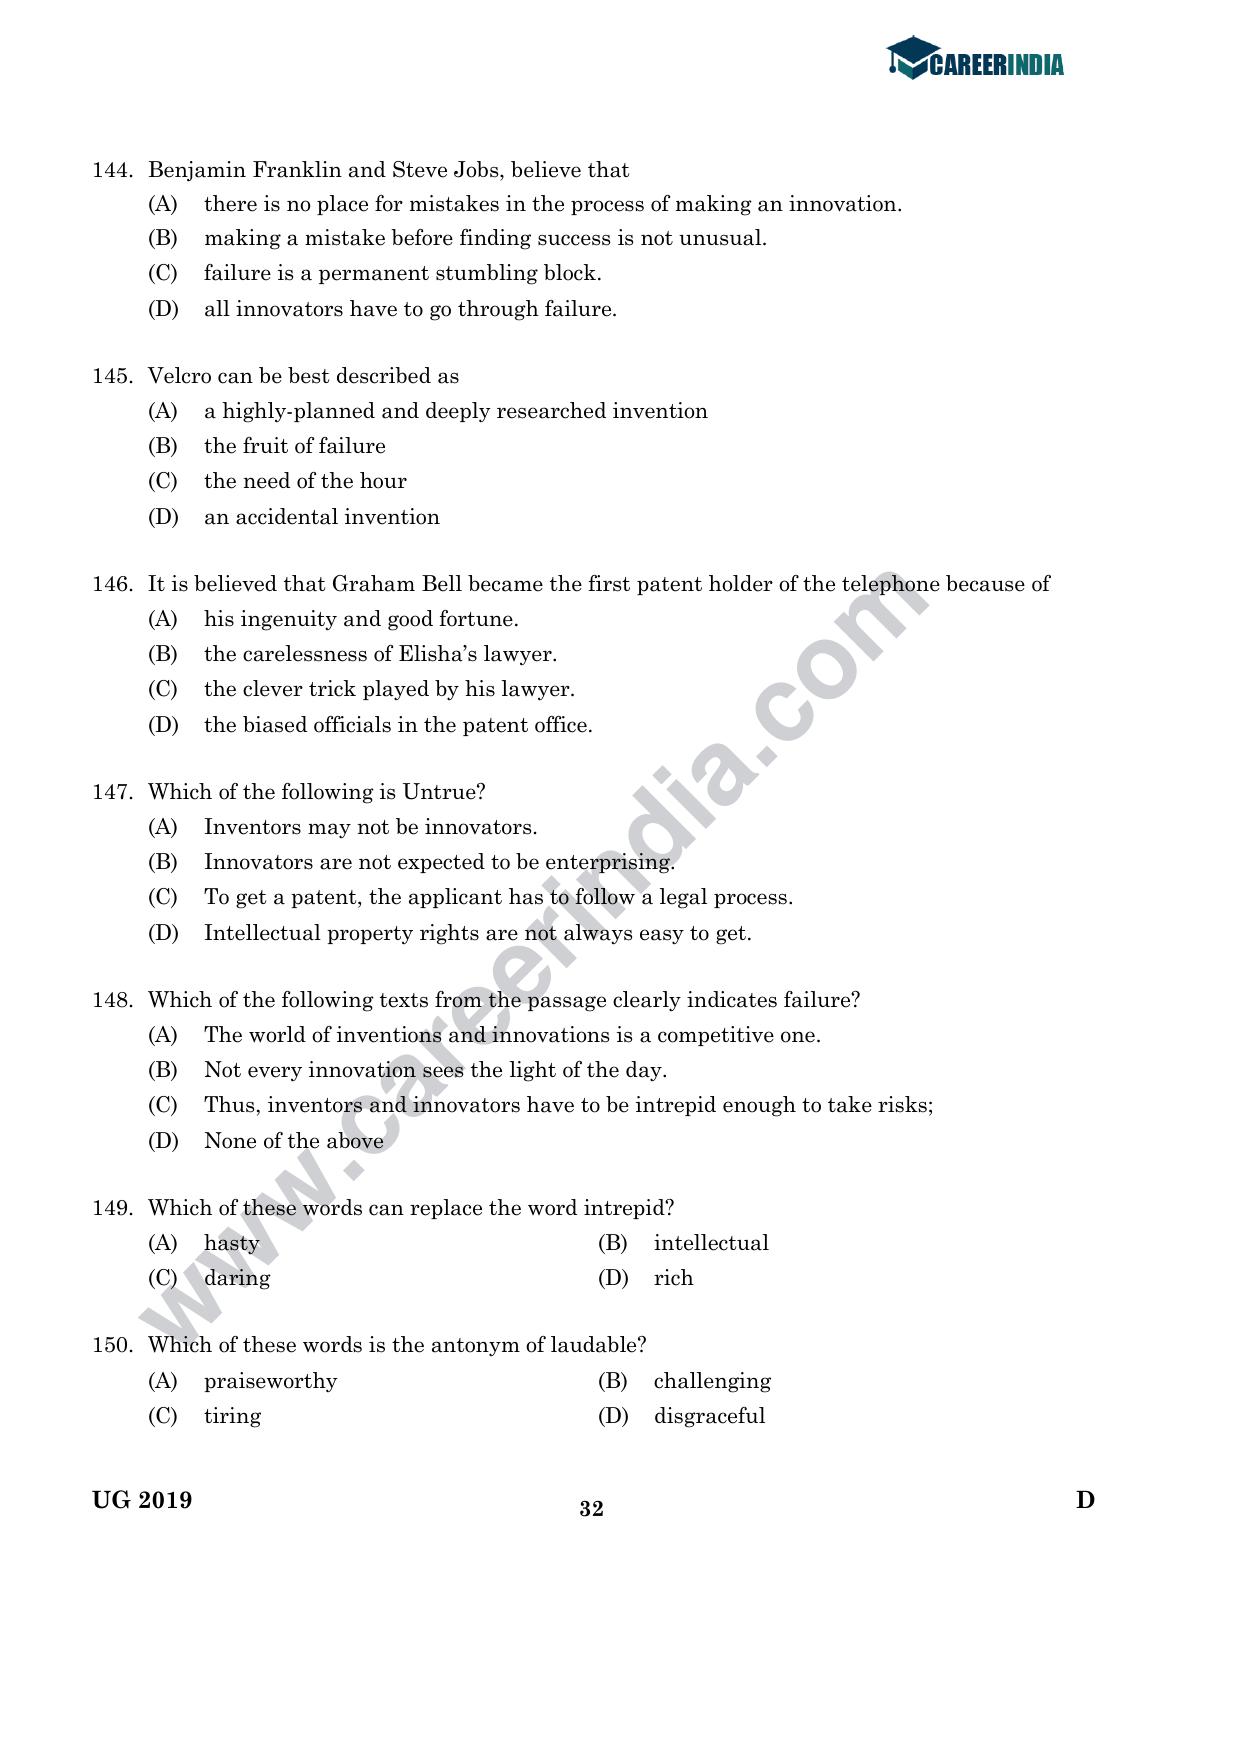 CLAT 2019 UG Logical-Reasoning Question Paper - Page 31